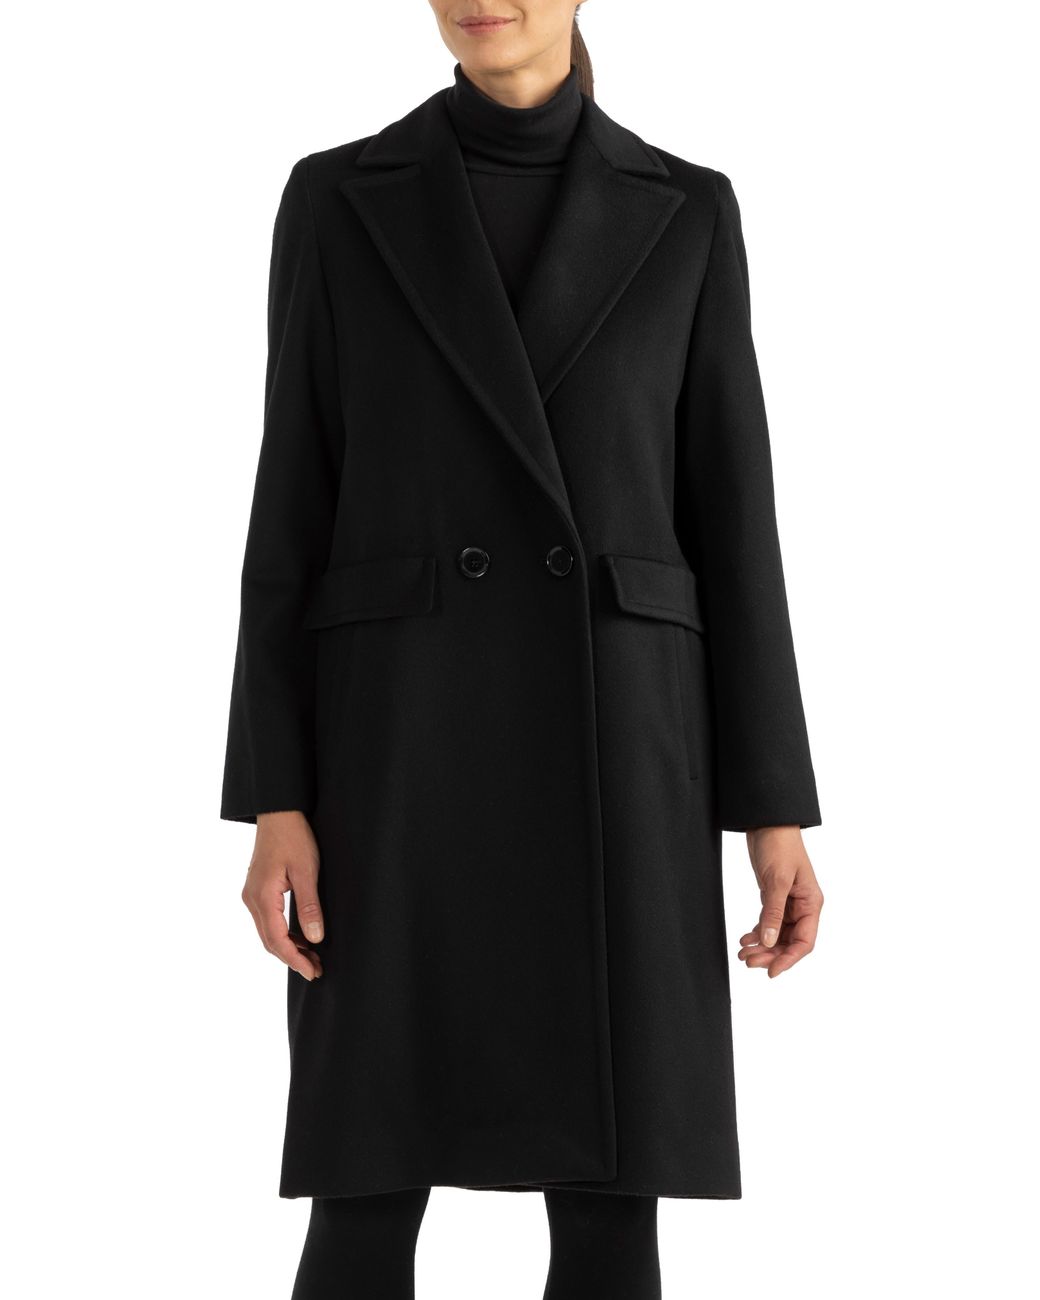 Sofia Cashmere Double-breasted Wool Blend Coat in Black | Lyst